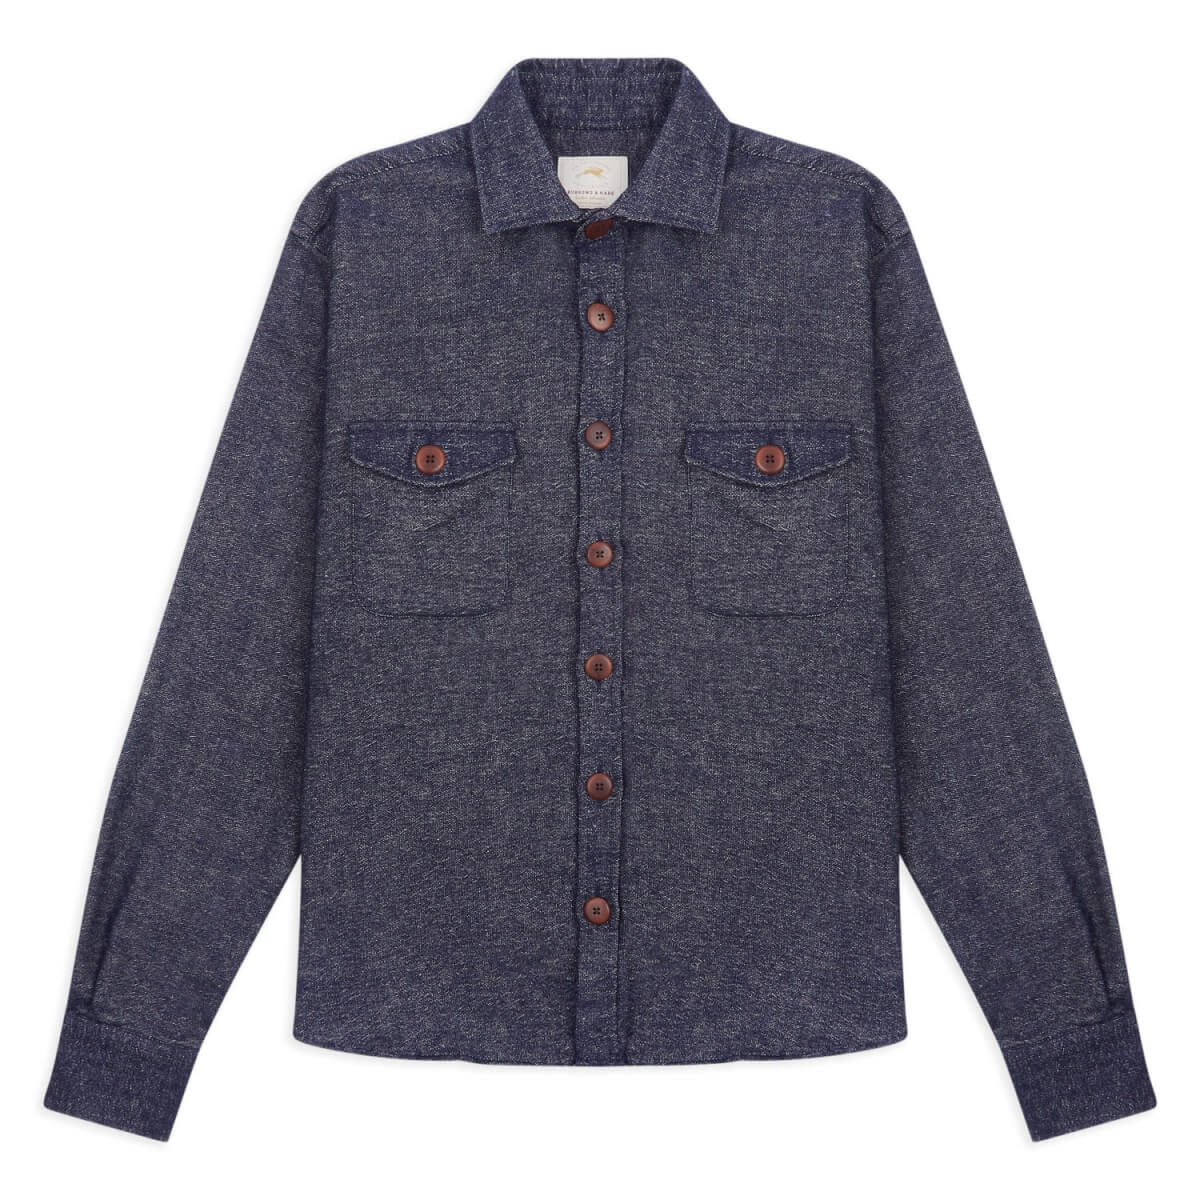 Men's Blue Over Shirt - Navy Small Burrows & Hare